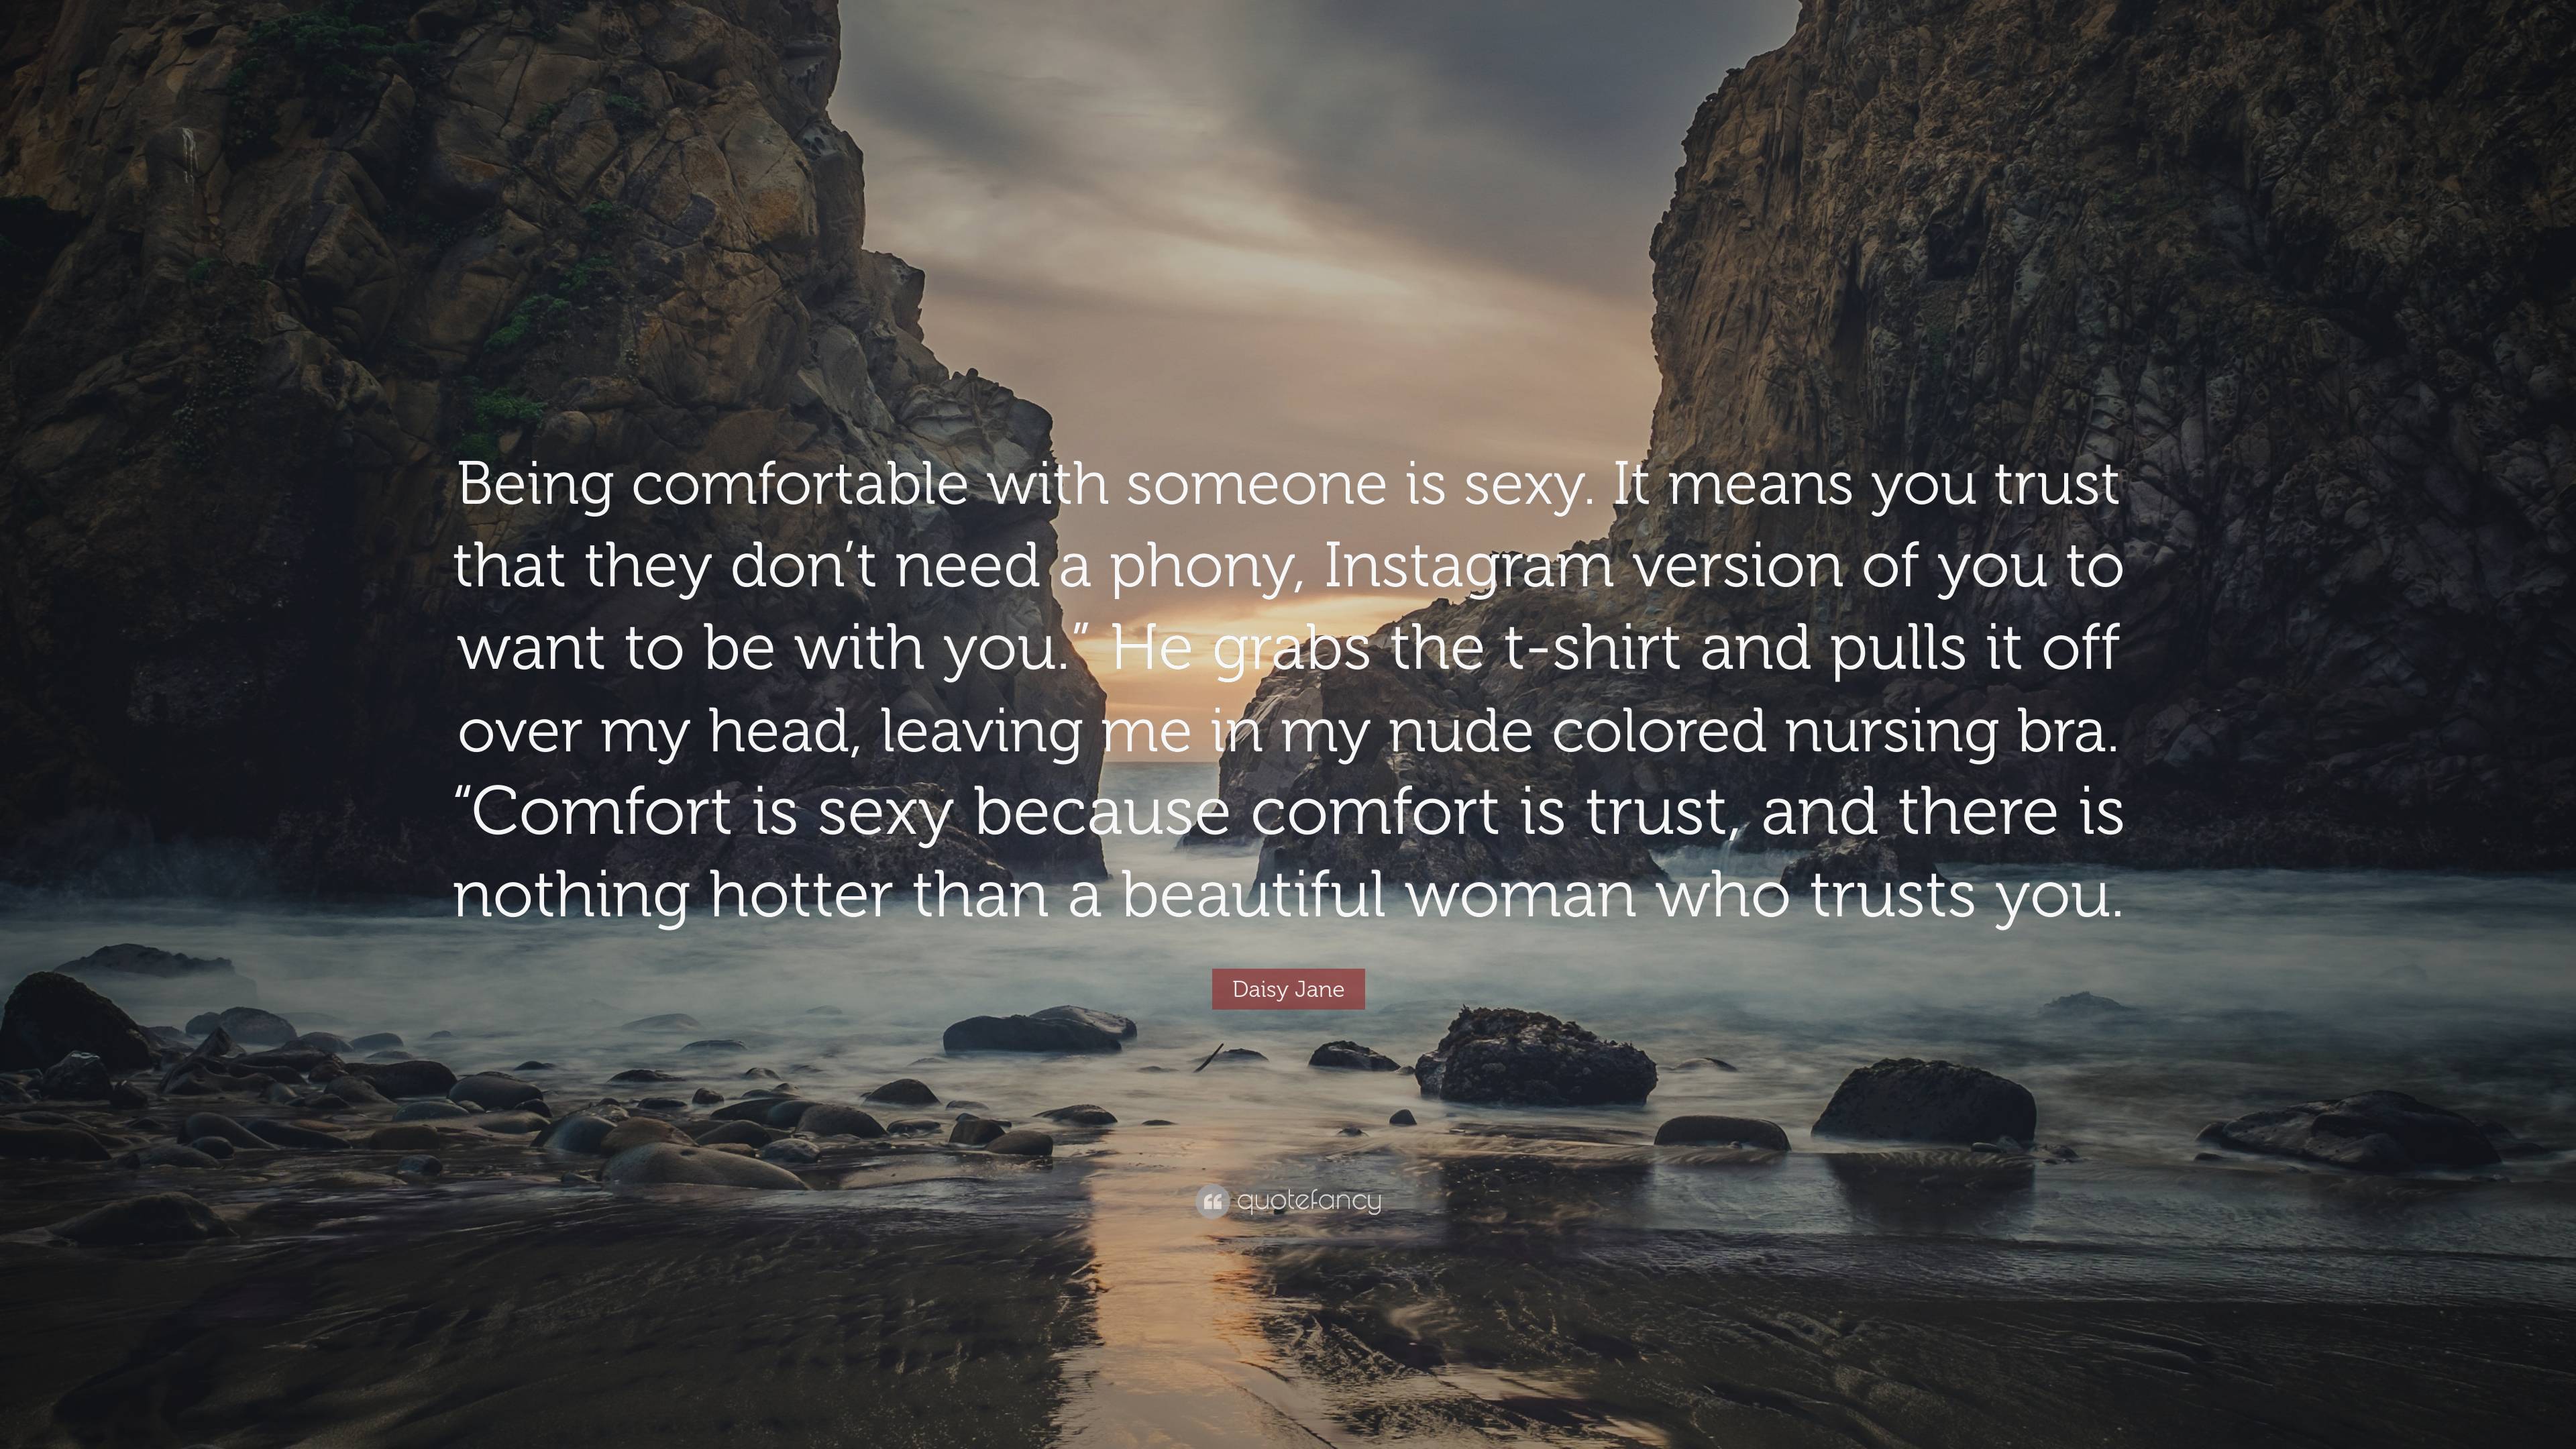 Daisy Jane Quote: “Being comfortable with someone is sexy. It